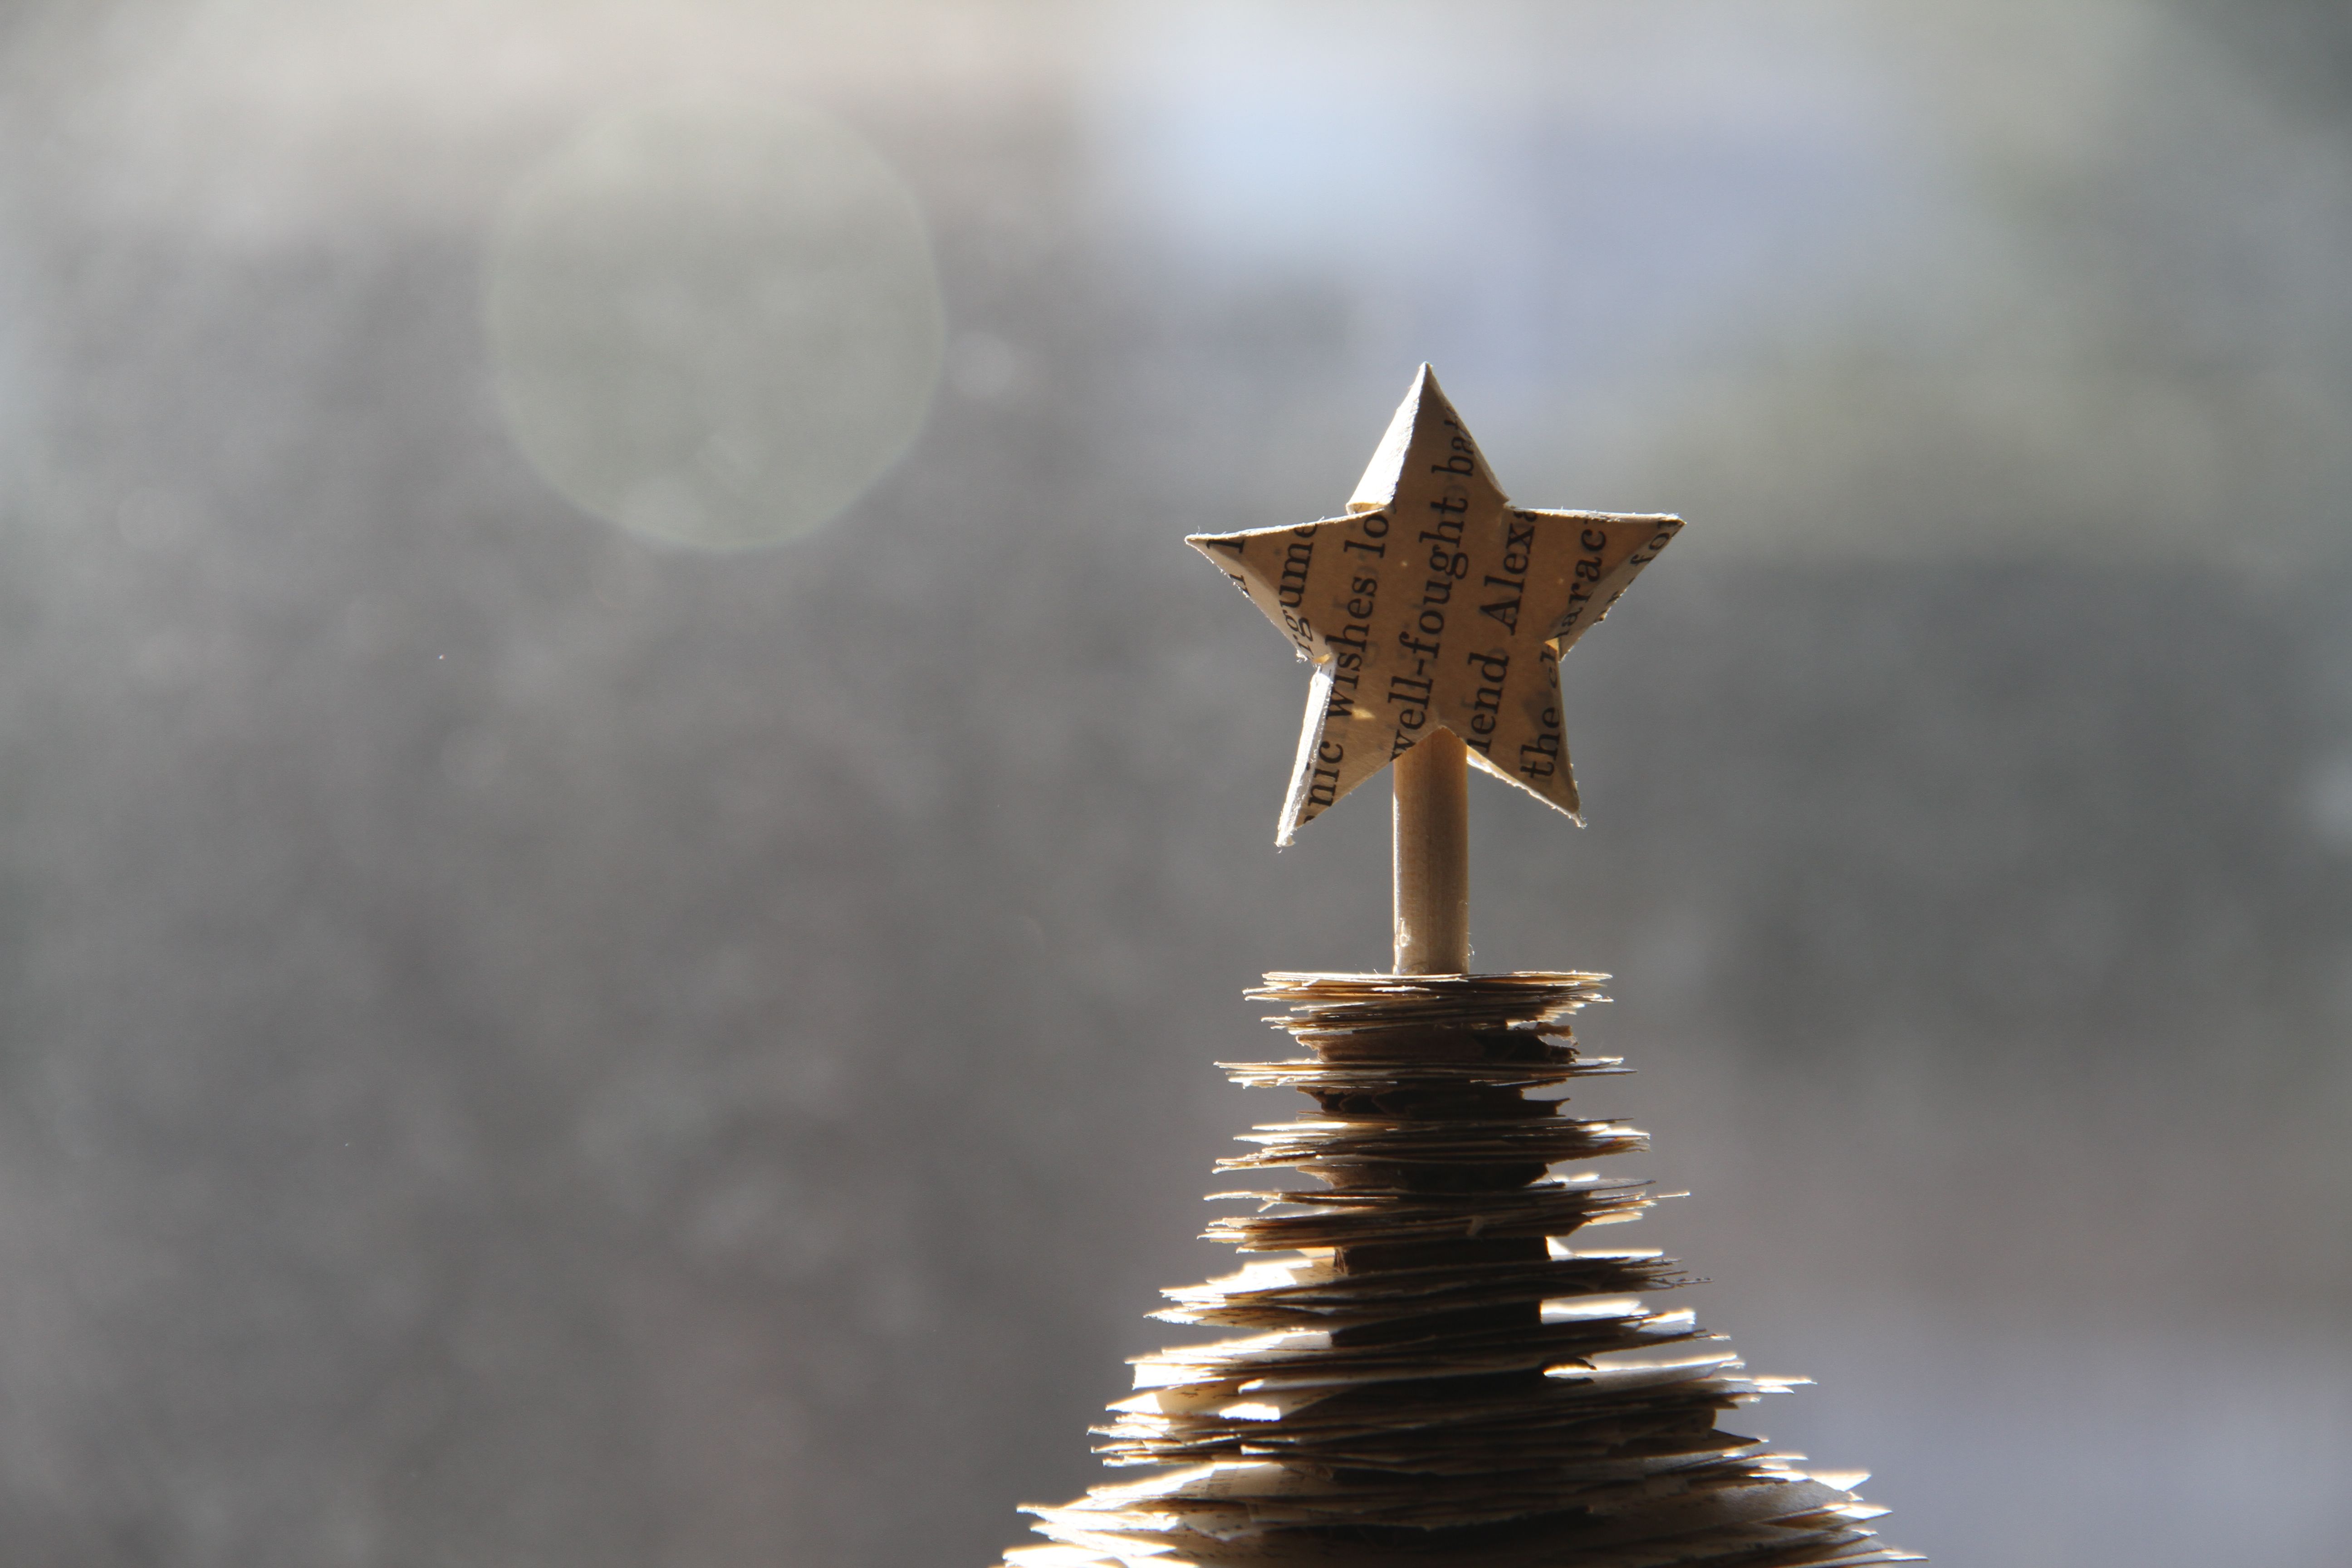 I also made a teeny, tiny star for my tree. Actually, I made this one before the big one. Just making it again once was enough to make me want to recreate my childhood idea with more skilled, adult hands.